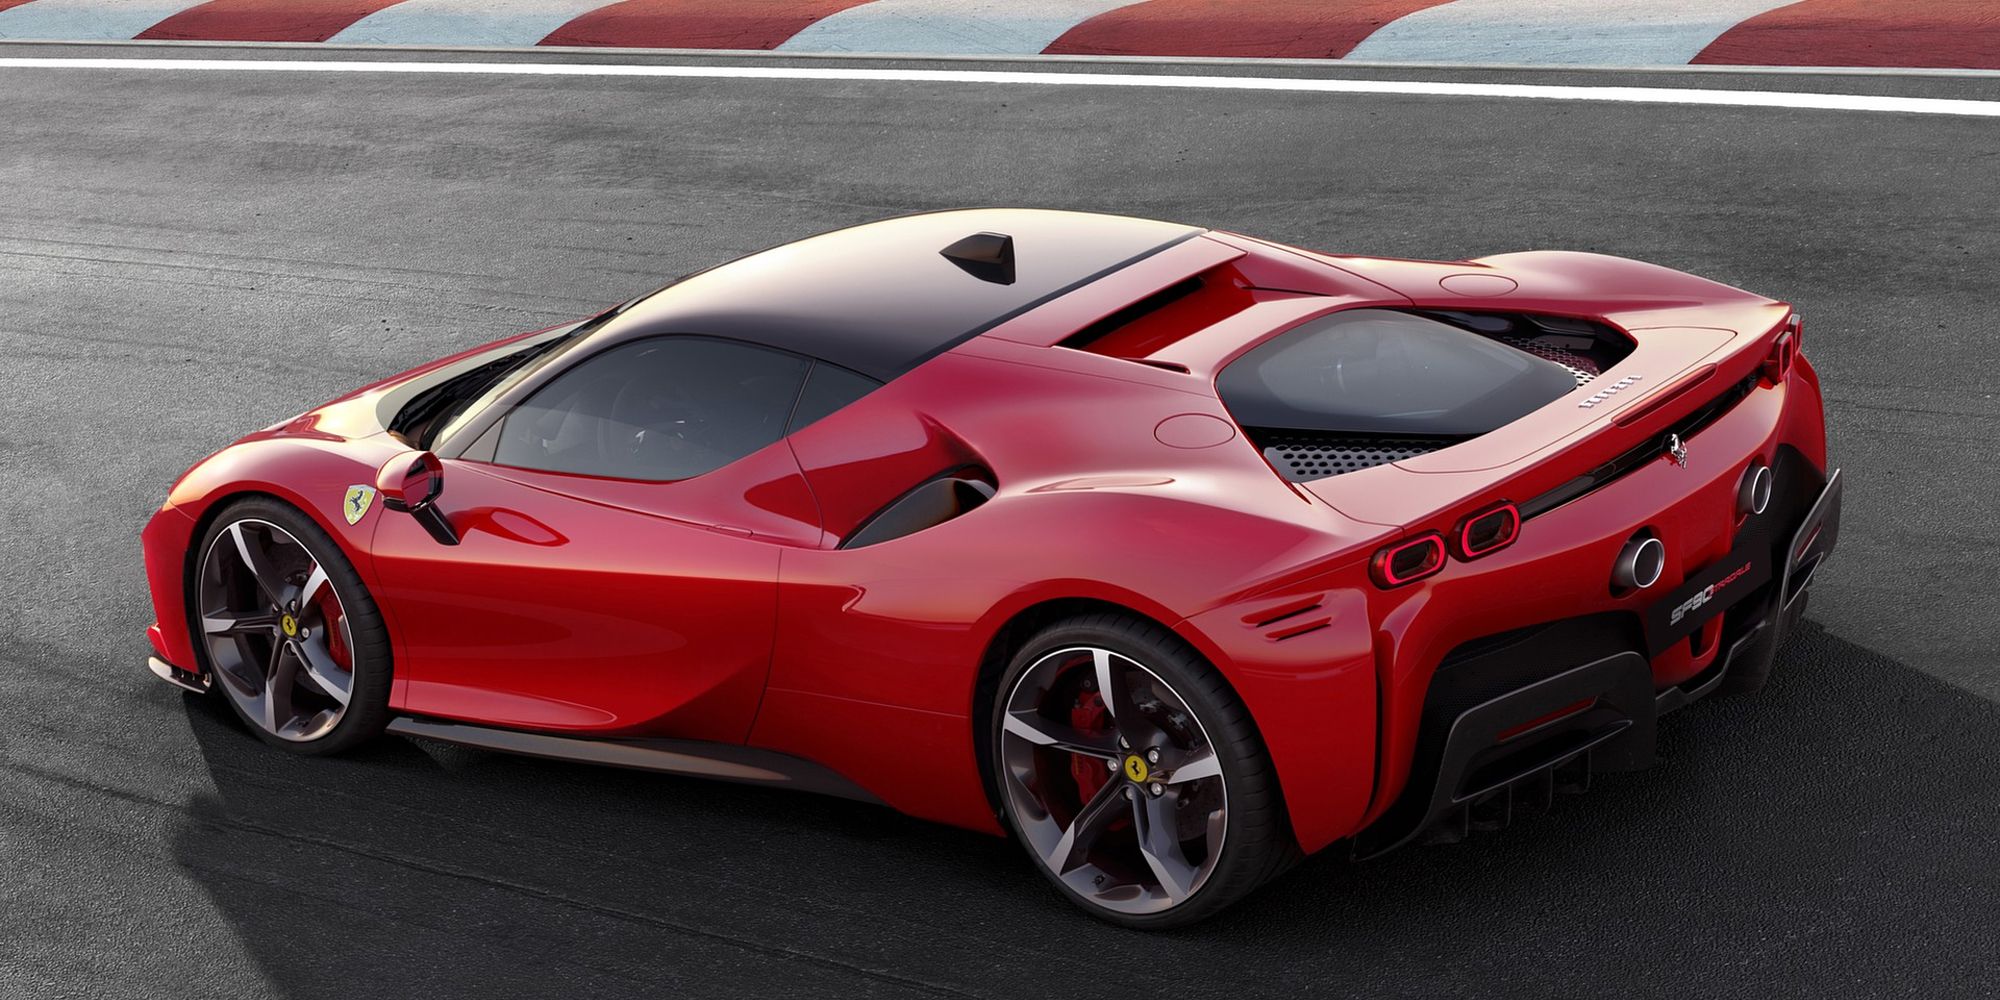 Rear 3/4 view of the SF90 Stradale